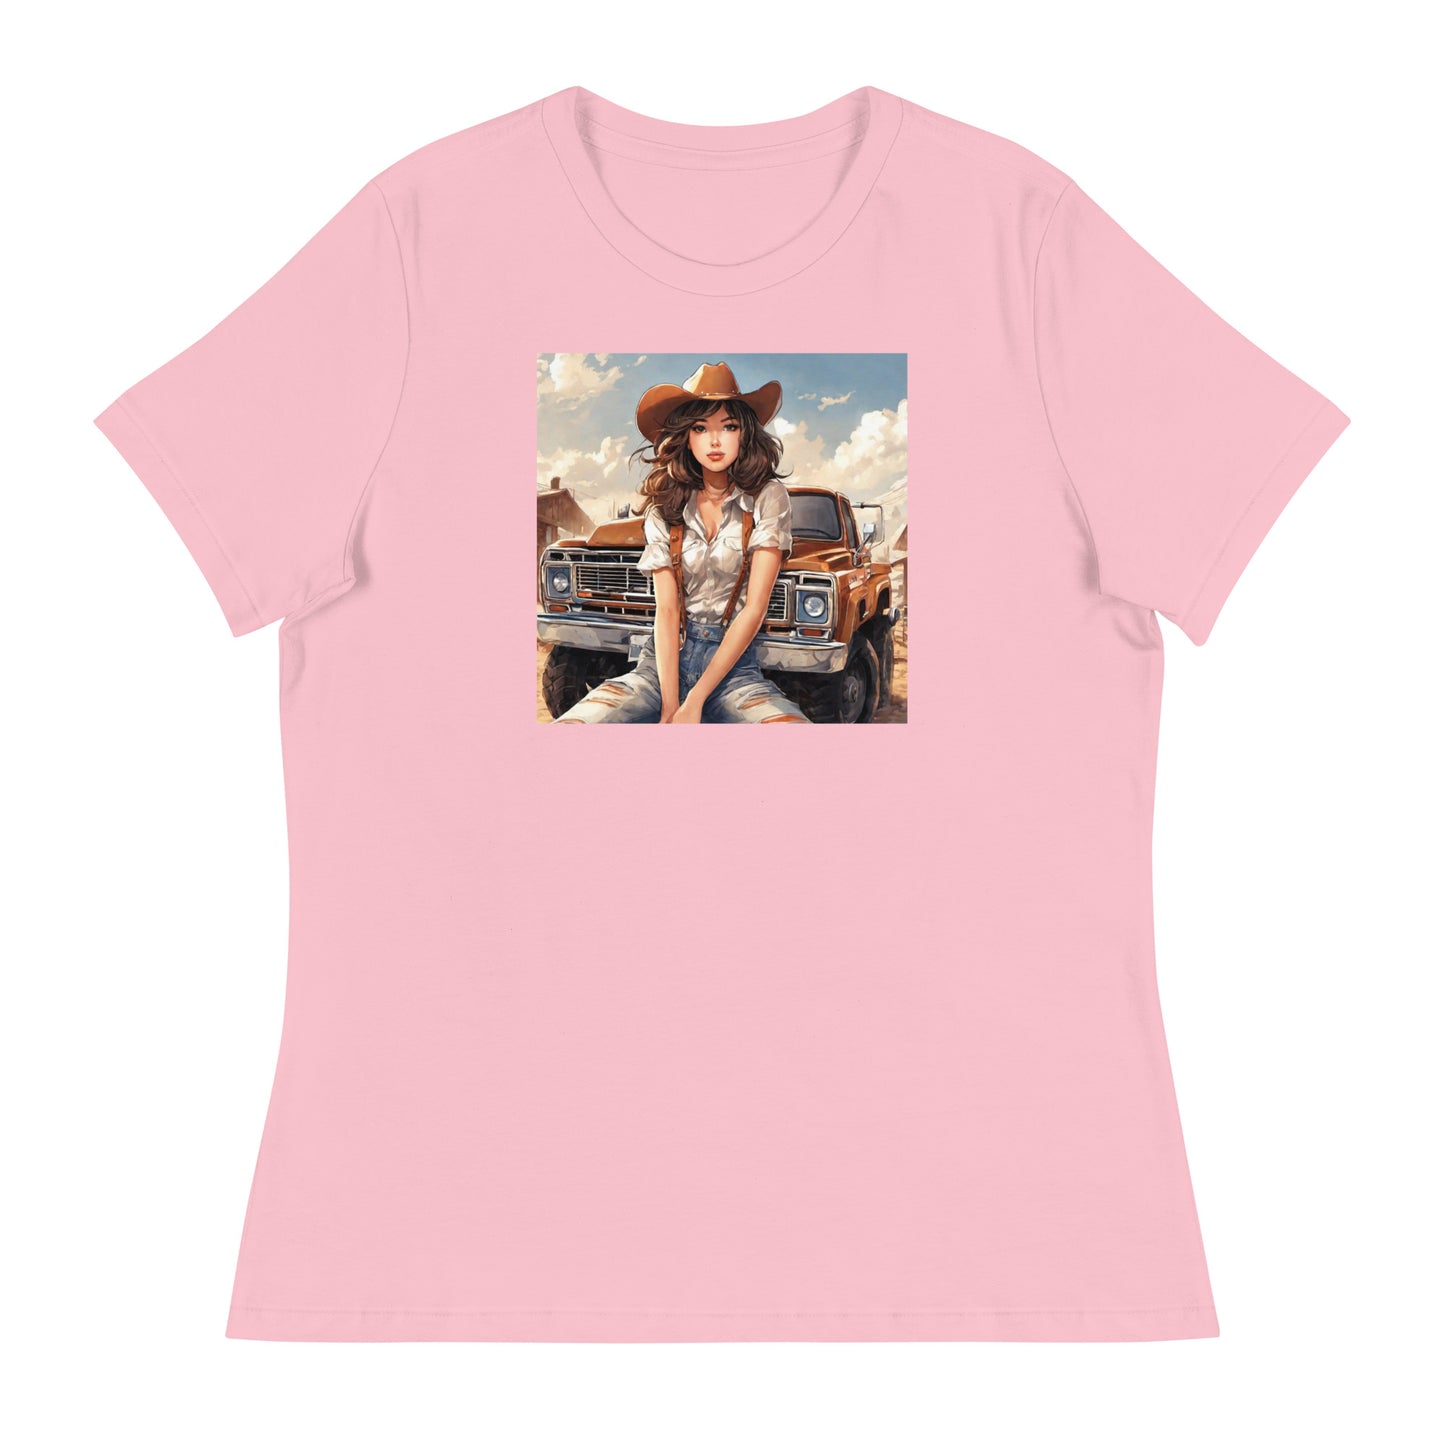 Cowgirl Cutie Women's Graphic T-Shirt Pink